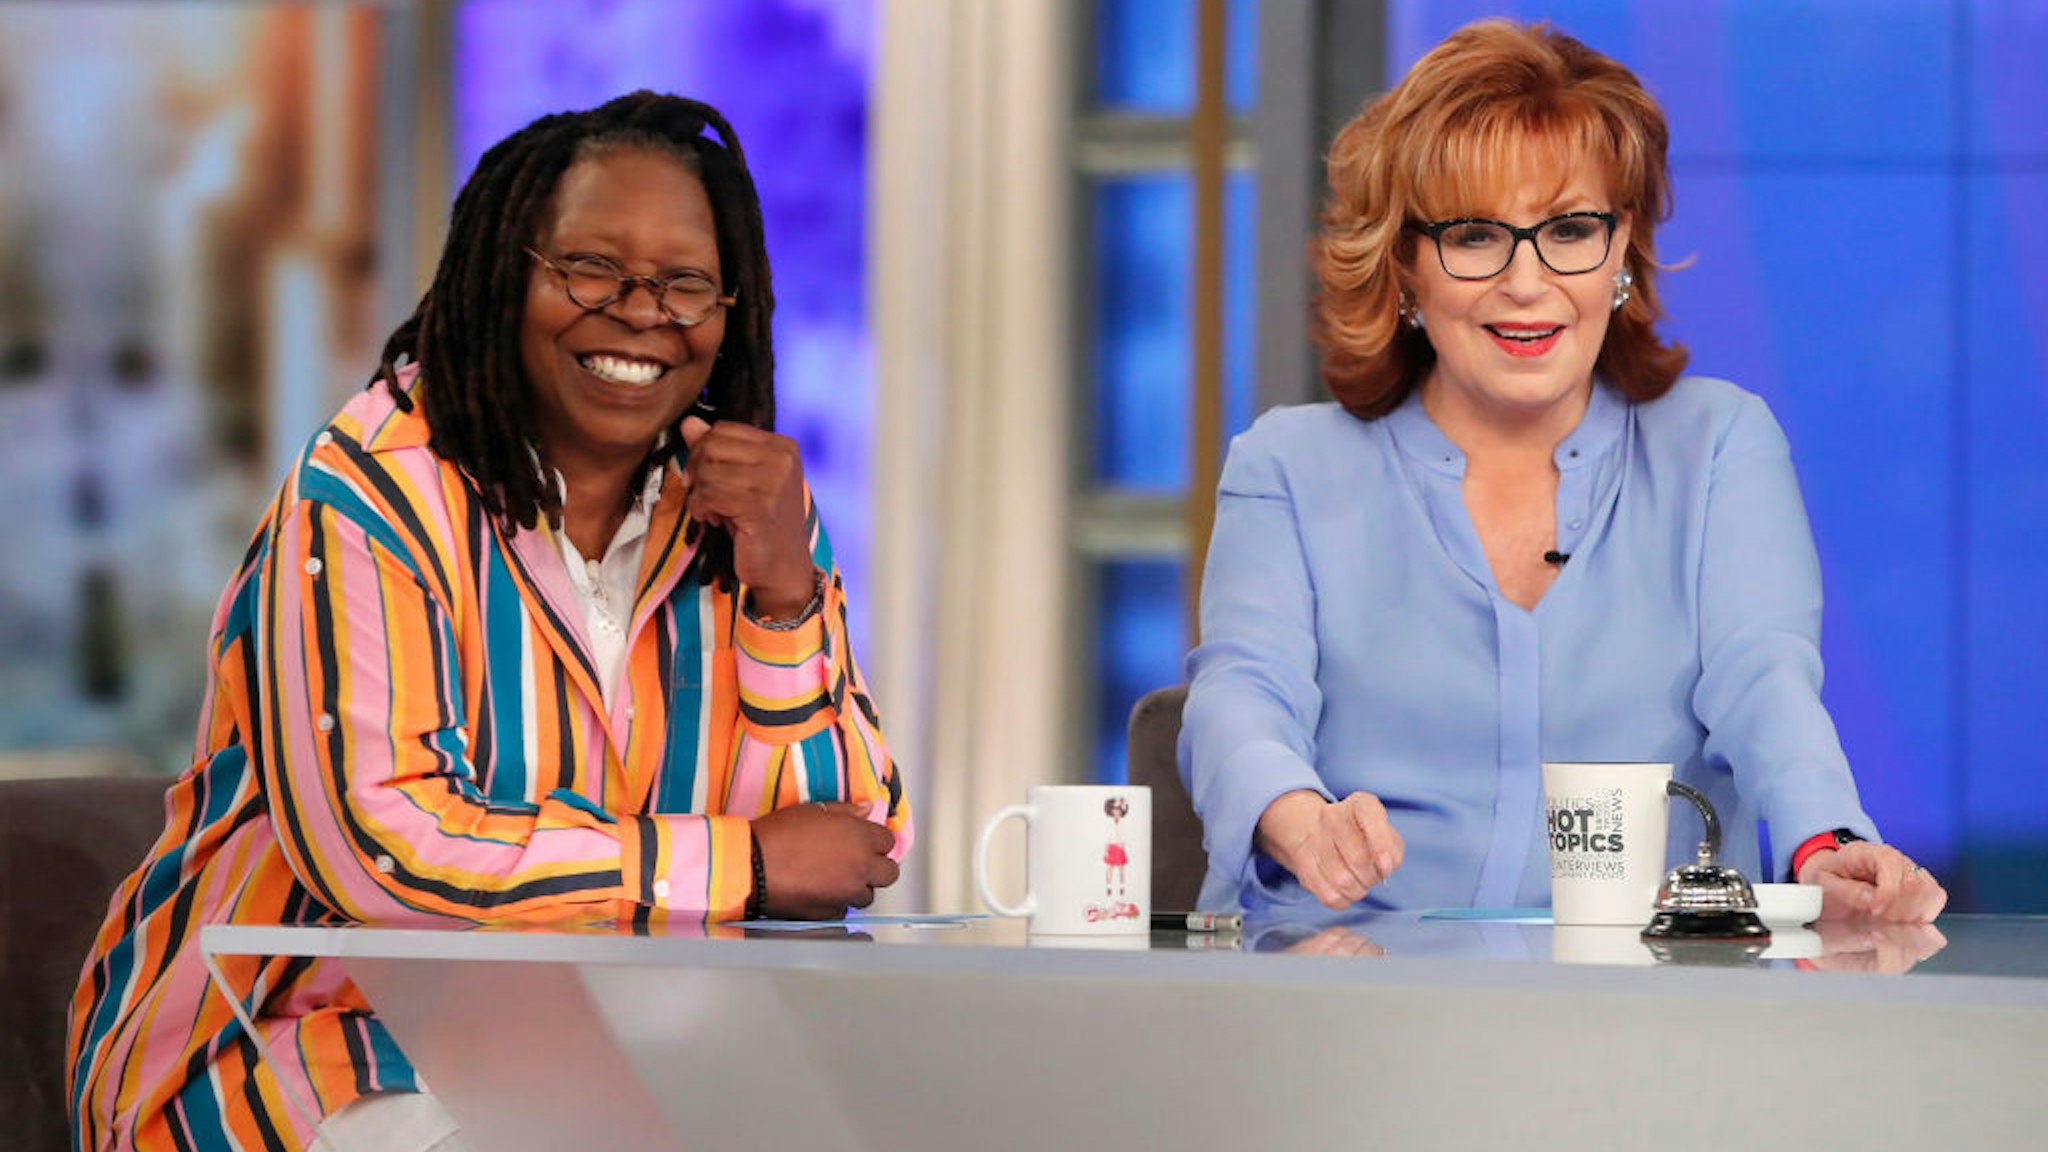 THE VIEW - 5/31/19 - David Letterman is a guest on Walt Disney Television via Getty Images's "The View" on Friday, May 31, 2019. "The View" airs Monday-Friday, 11am-12pm, ET on Walt Disney Television via Getty Images.